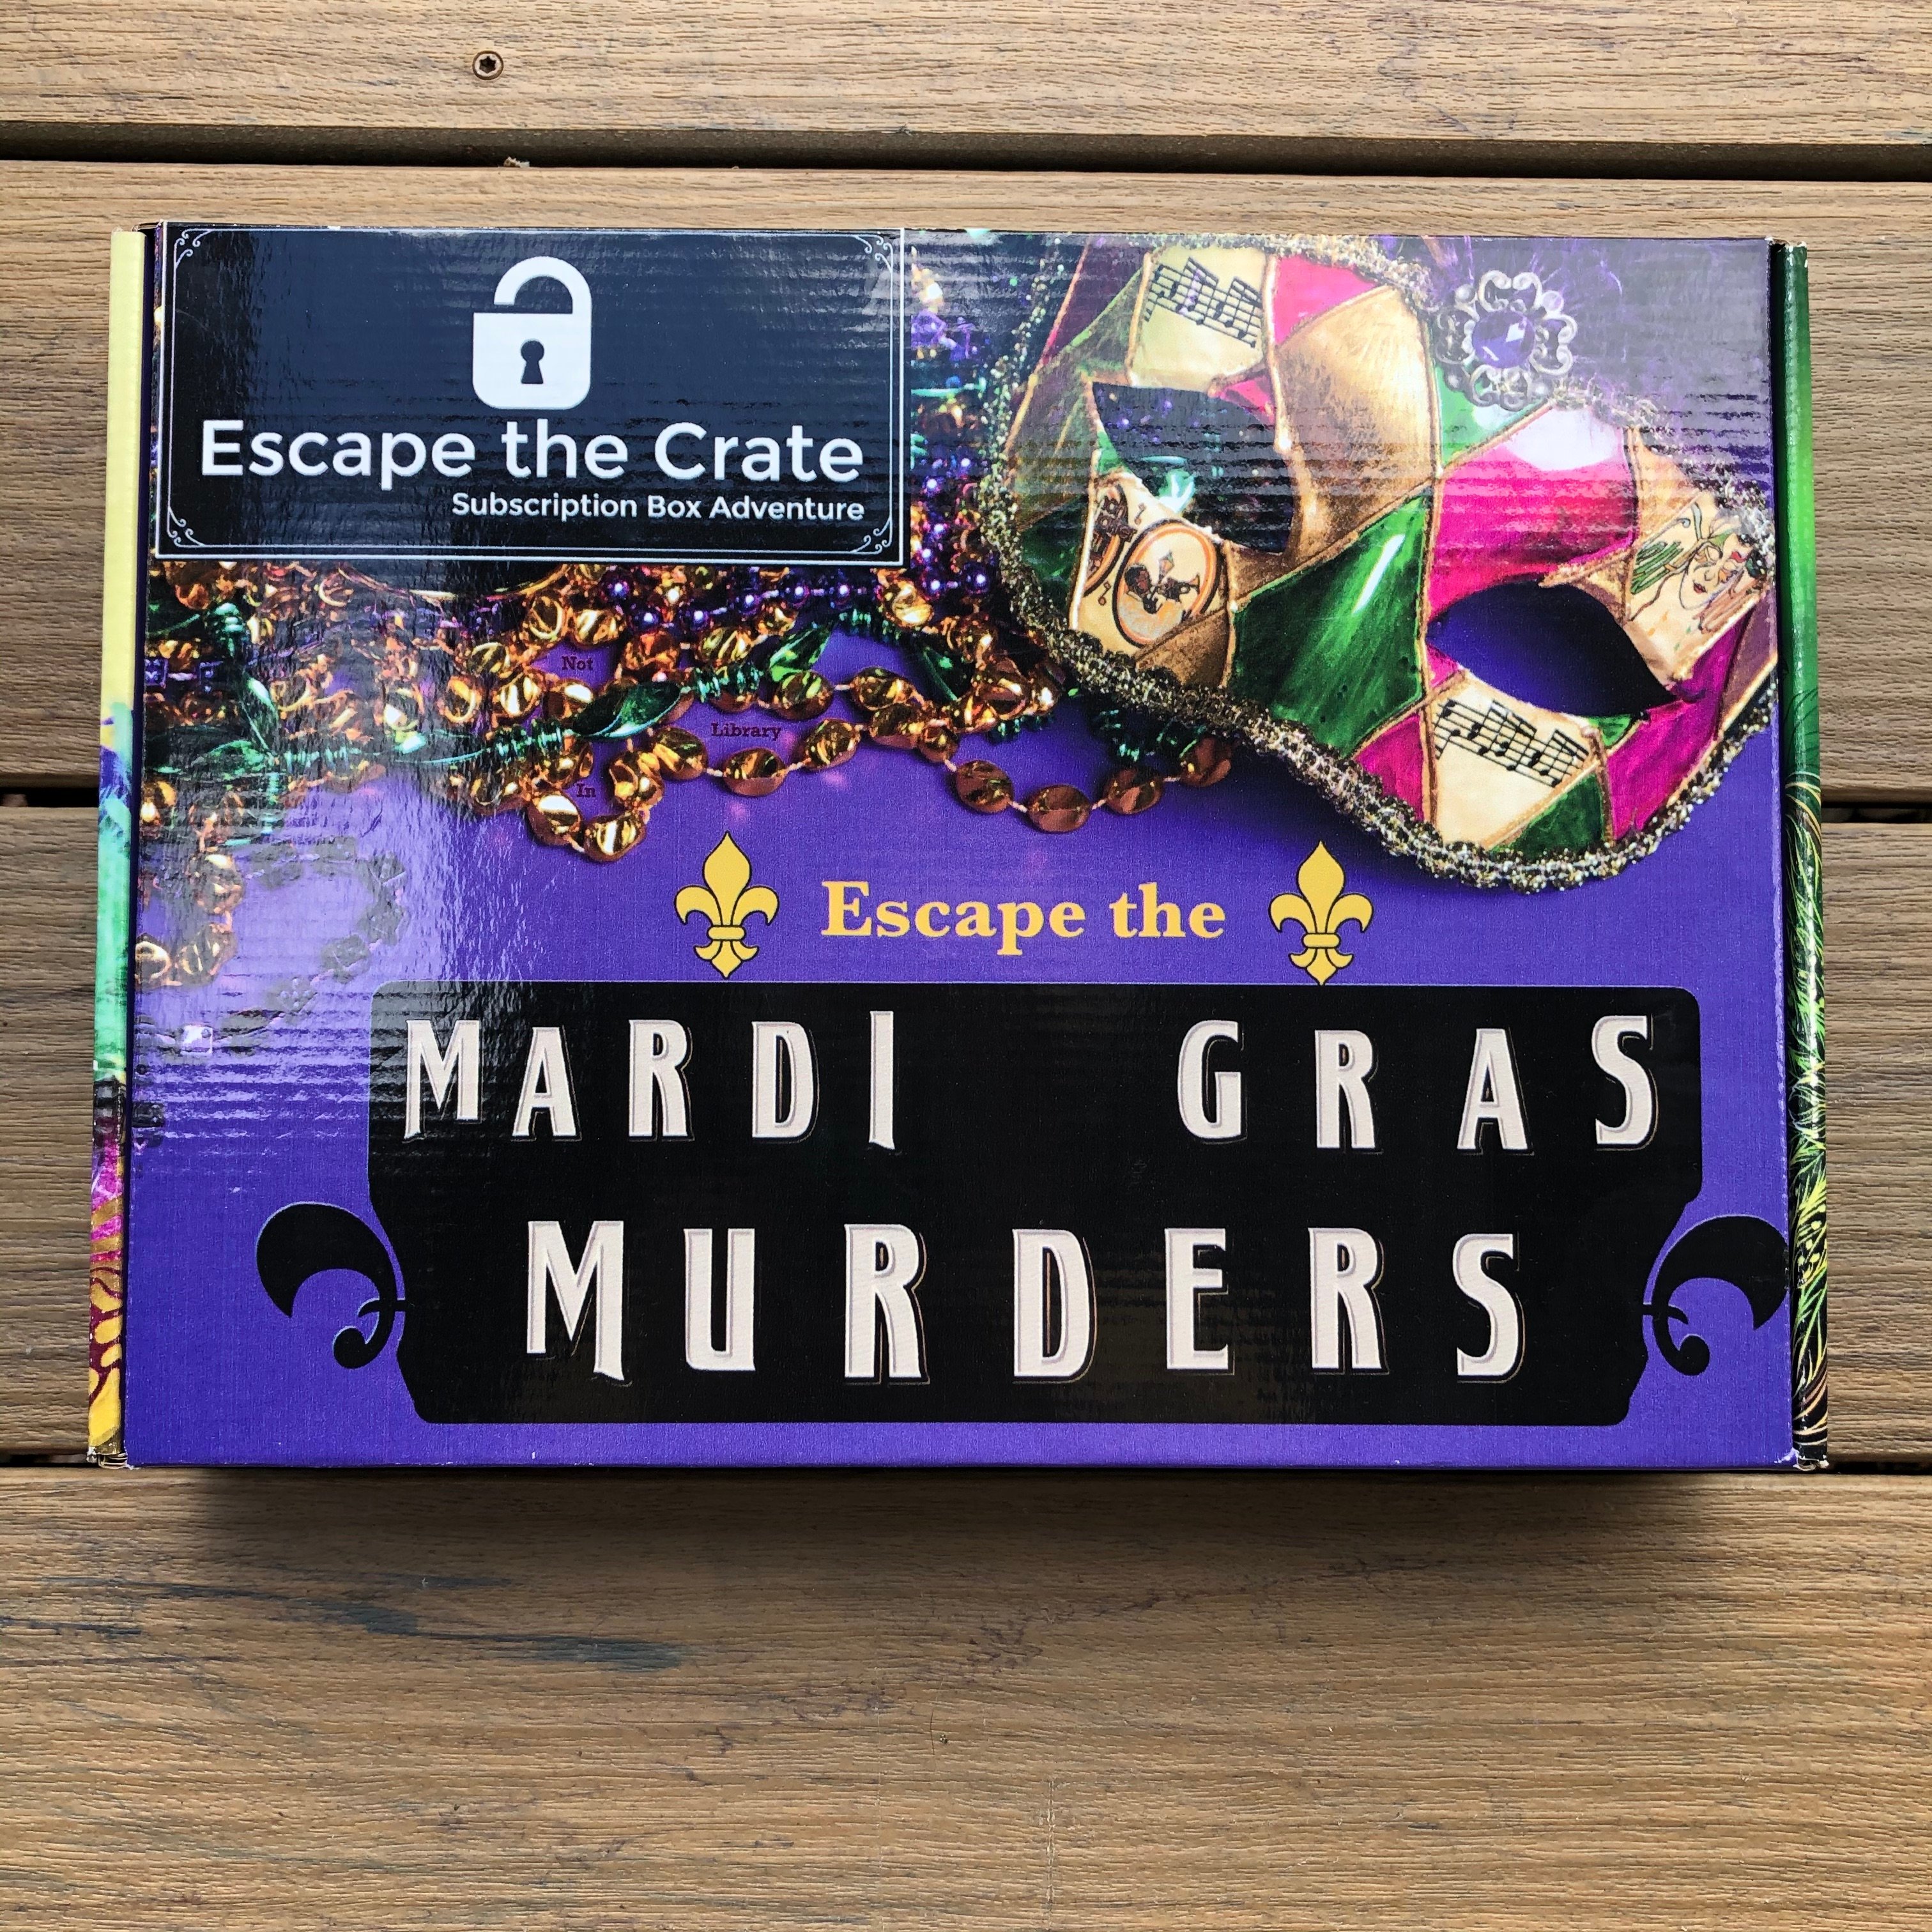 Escape the Crate Review + Coupon – “Mardi Gras Murders”